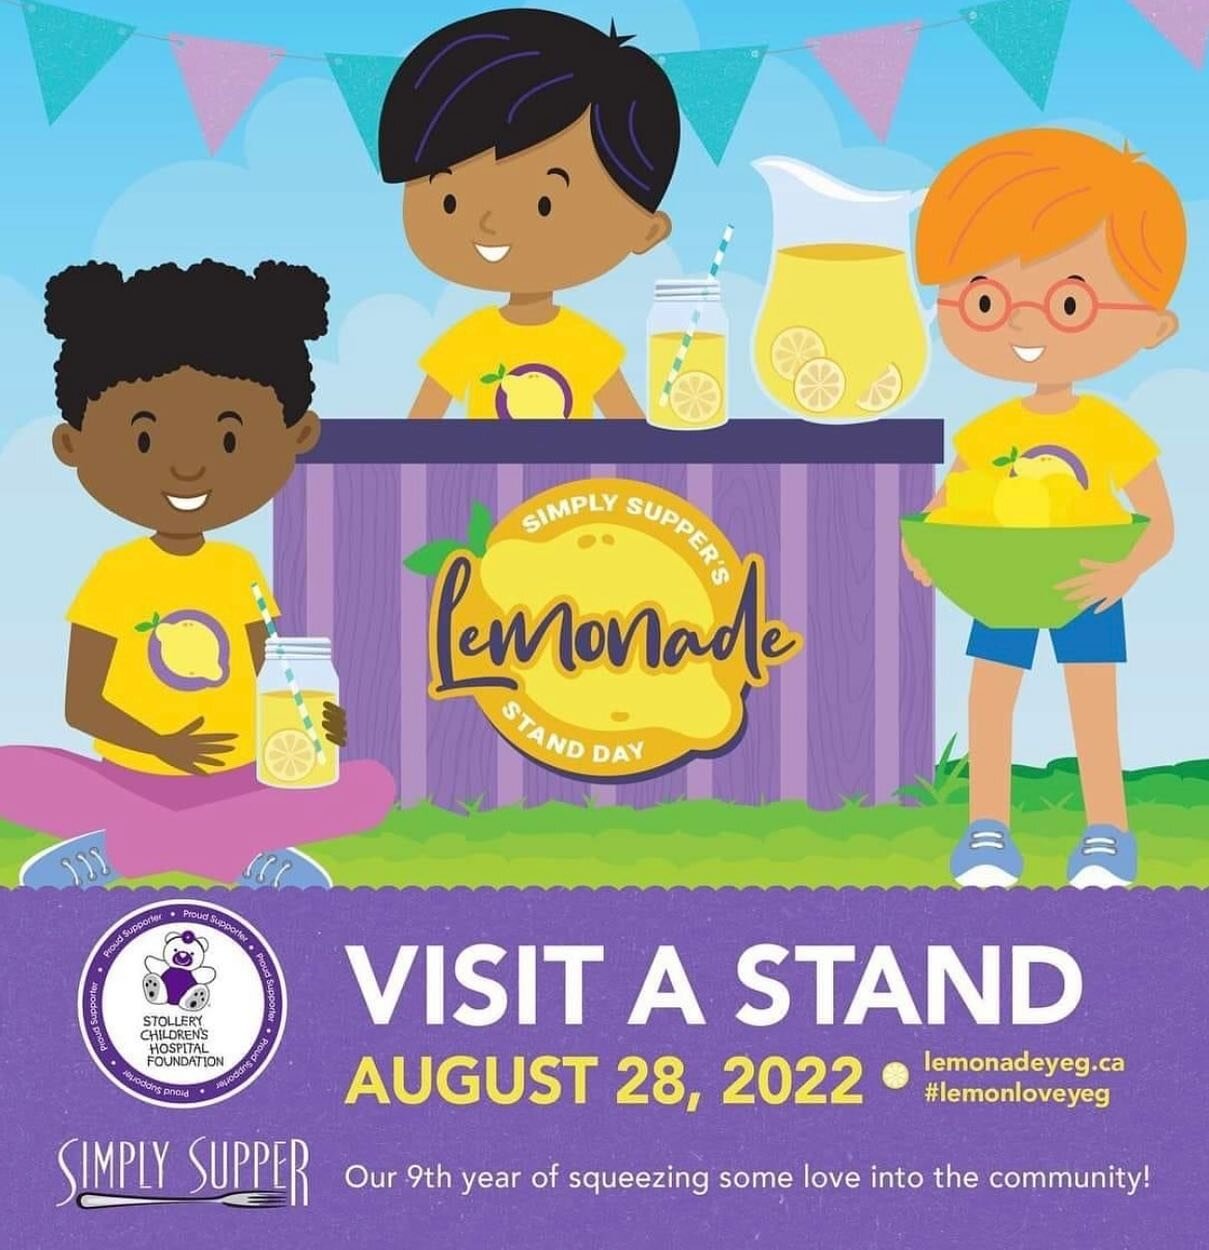 Sunday August 28!

Hi Kennedy can you post this on Facebook tomorrow and put a story on instagram.

Sunday August 28
12-4pm

A few local kiddos will be raising money for the Stollery Children's Hospital this Sunday. Come visit them for iced tea, lemo